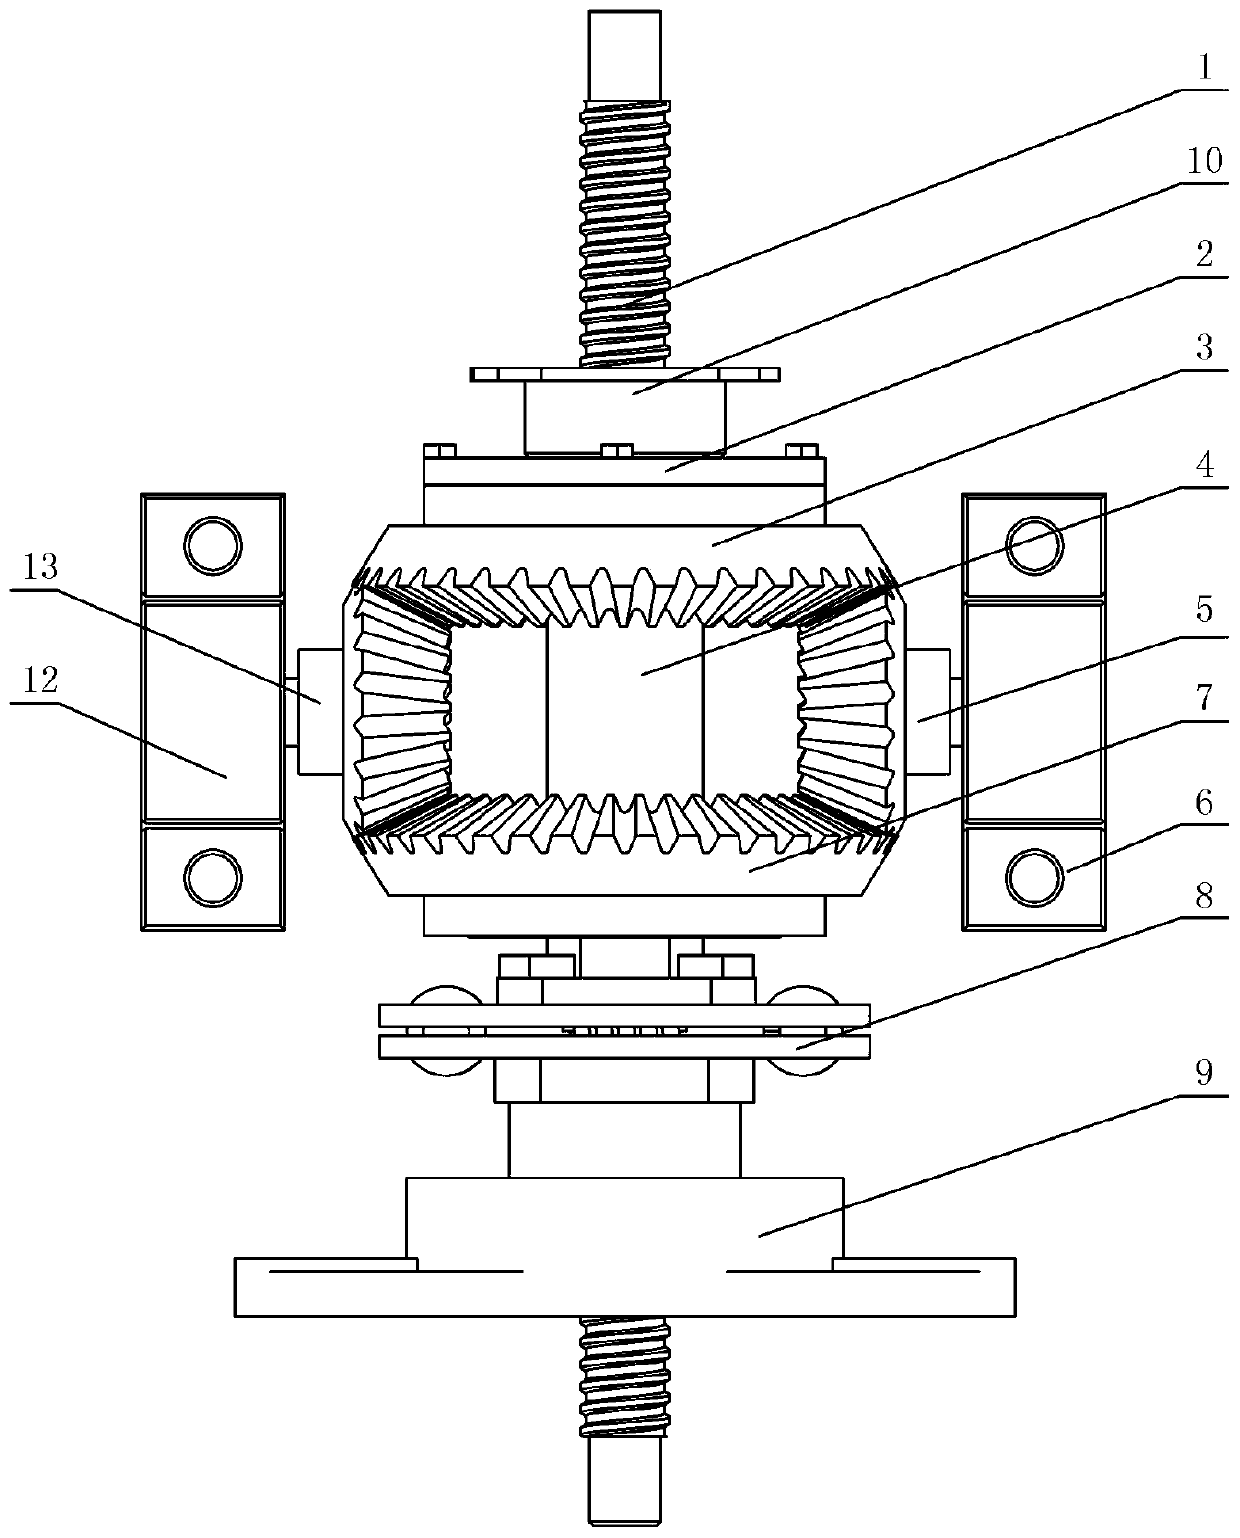 A mechanical vibration-electric energy conversion device with integrated mechanical rectification mechanism